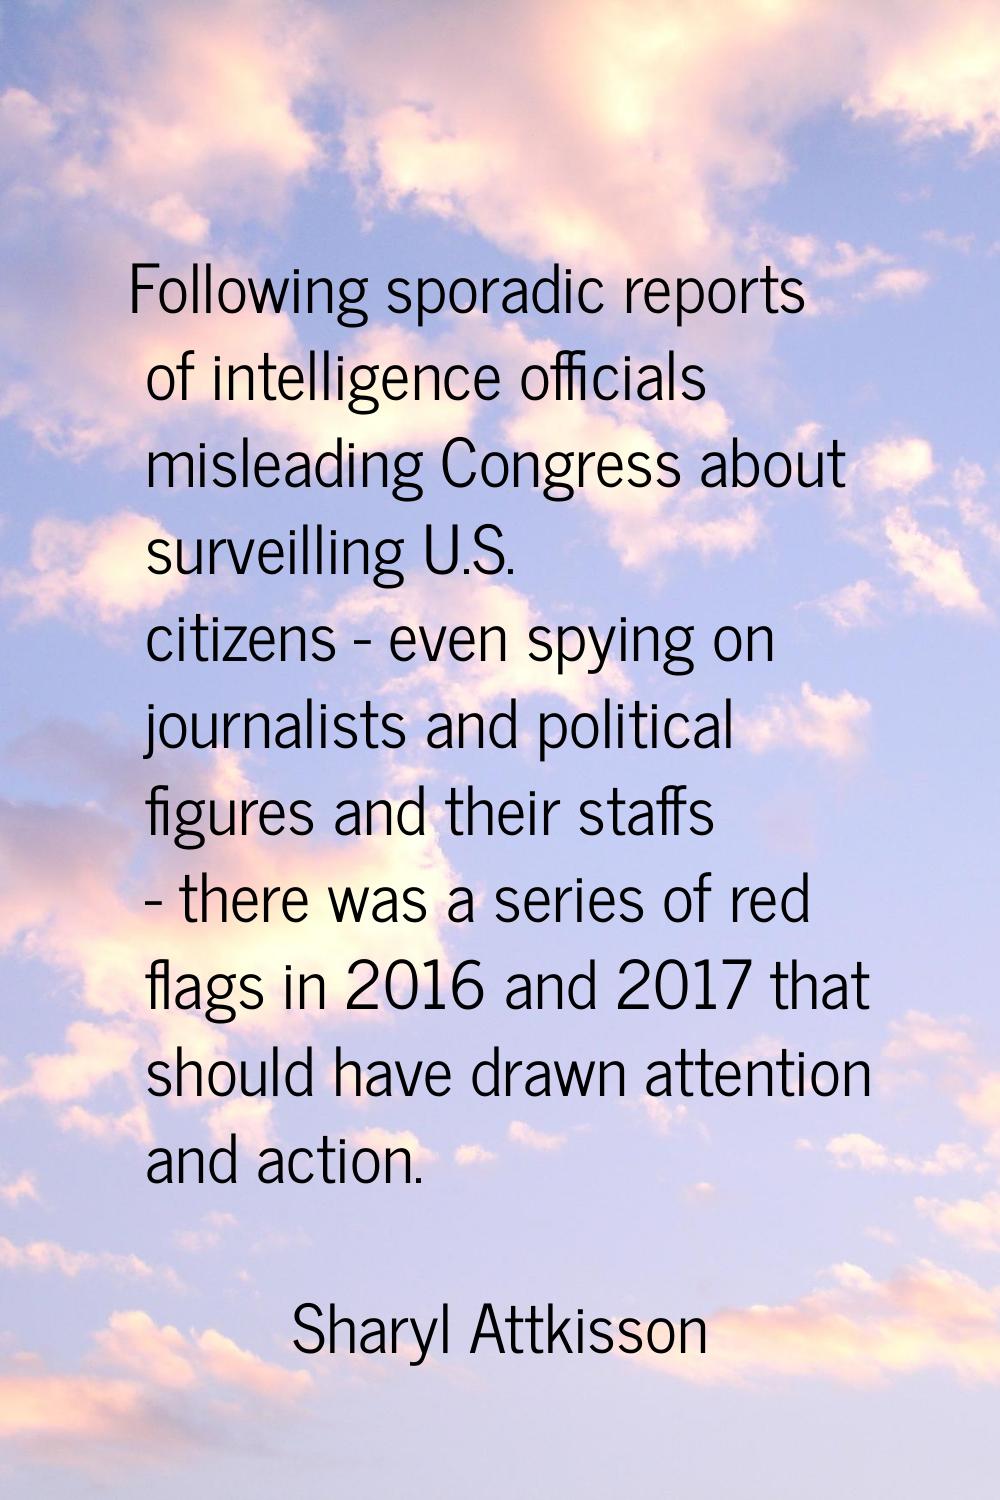 Following sporadic reports of intelligence officials misleading Congress about surveilling U.S. cit